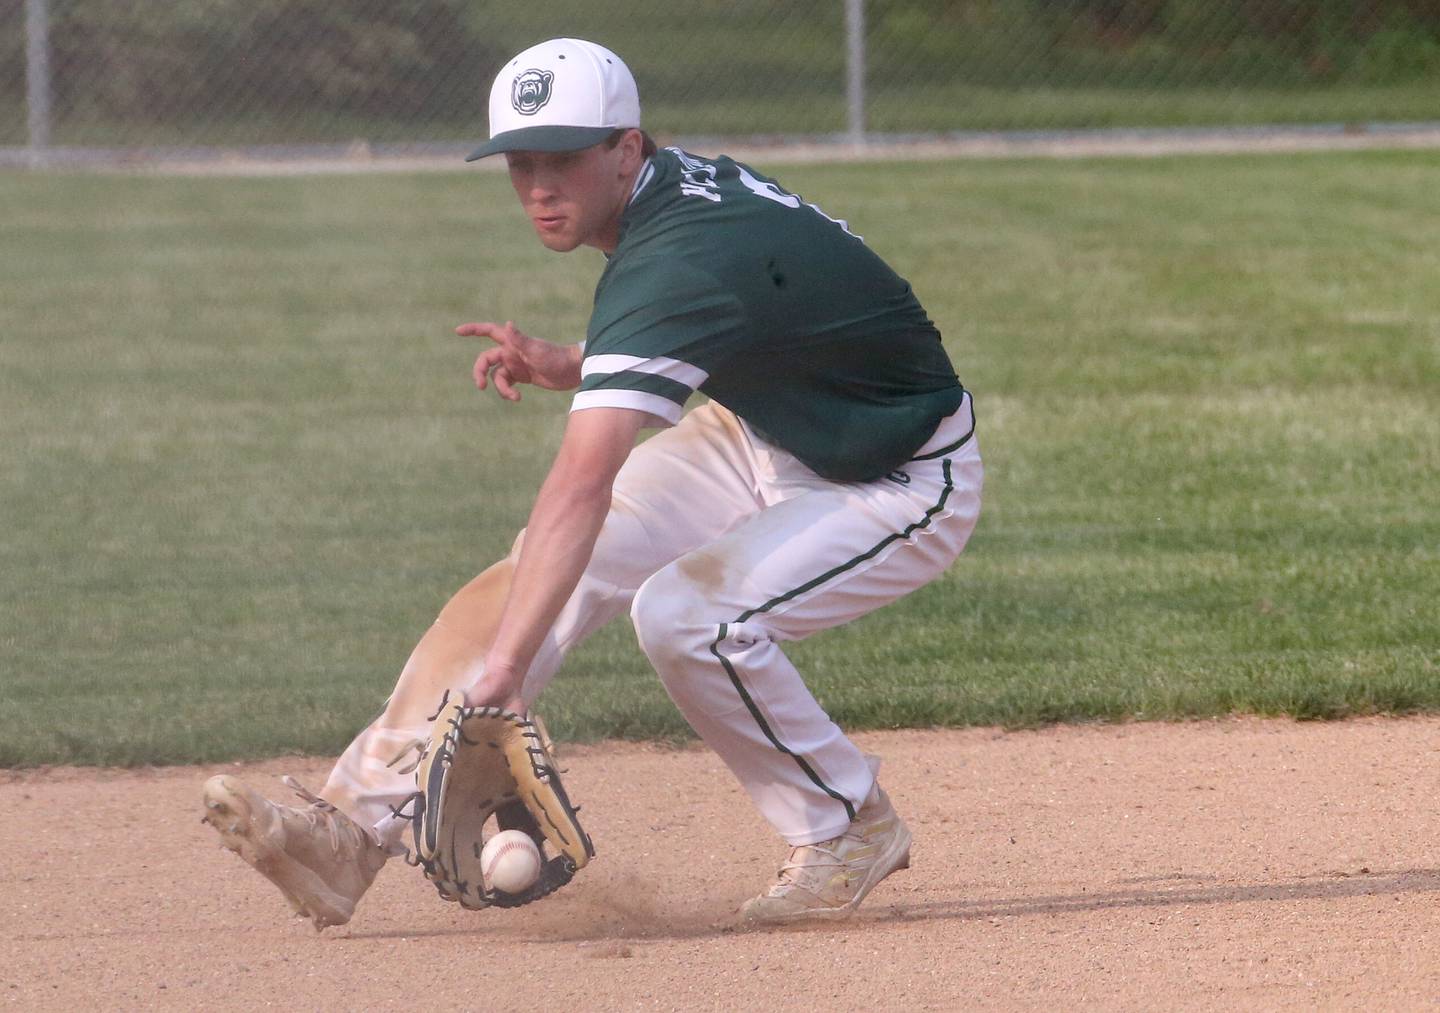 St. Bede's Brendan Pillion back hands the ball at short stop to make a play against Yorkvlle Christian in the Class 1A Regional semifinal game on Thursday, May 18, 2023 at Masinelli Field in Ottawa.